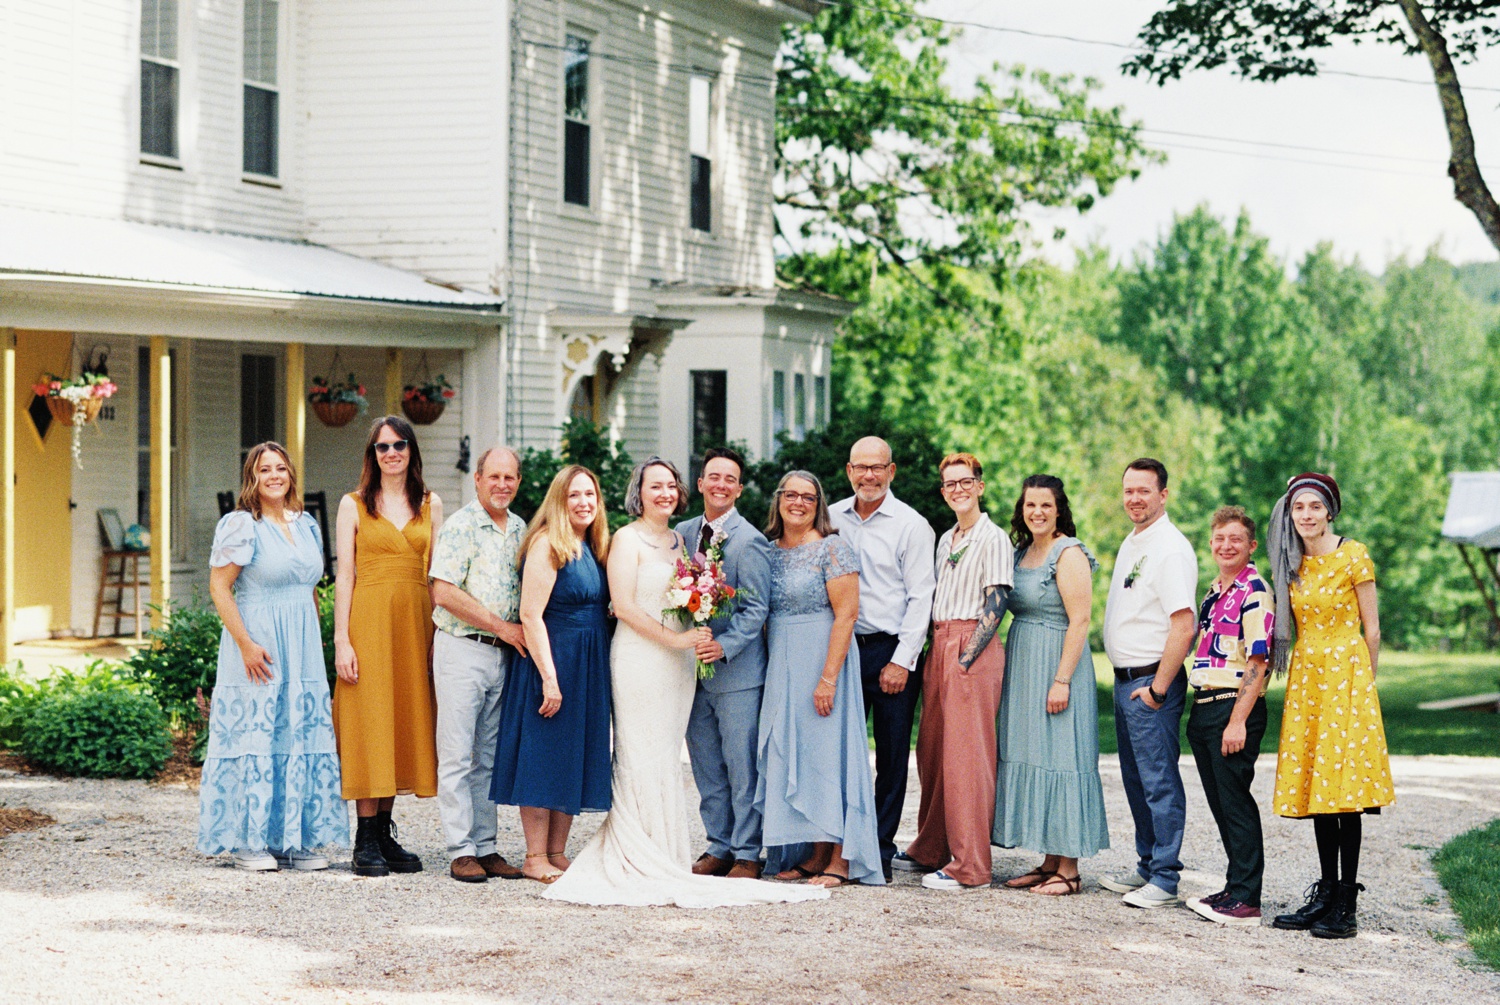 A couple poses with family members for a formal wedding portrait outside a Maine wedding venue.